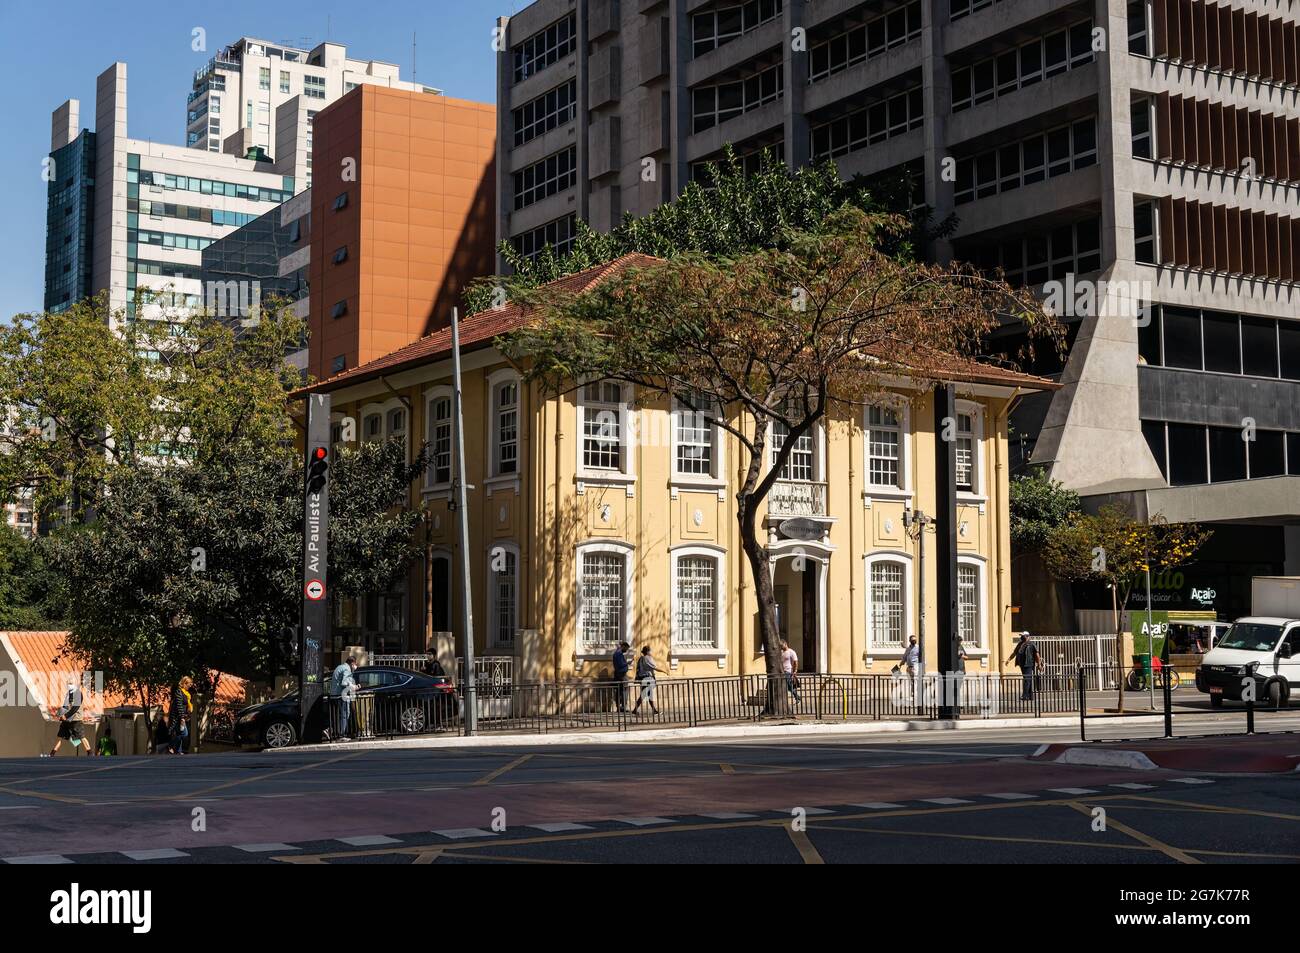 The Pasteur Institute at 393 Paulista Avenue with Carlos Sampaio street, responsible for epidemiological surveillance and disease researches. Stock Photo